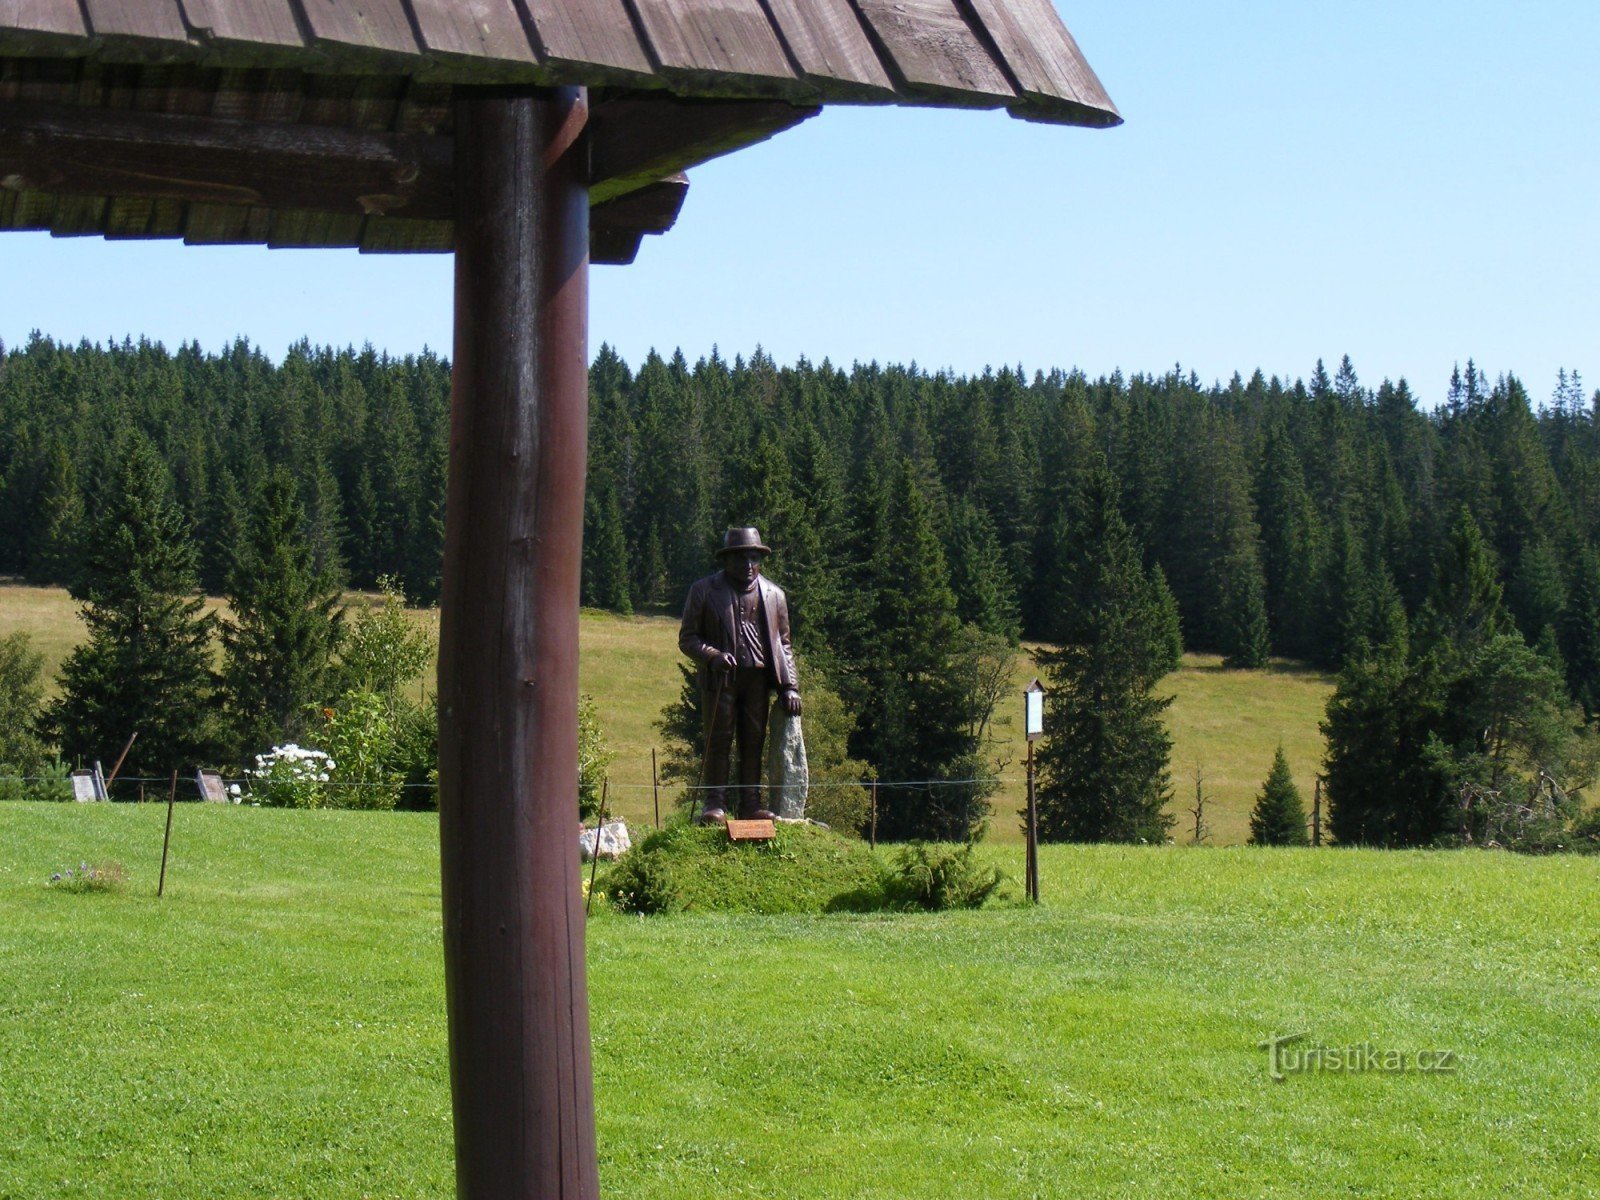 In the background, a wooden sculpture by Sepp Rankl (August 2008)